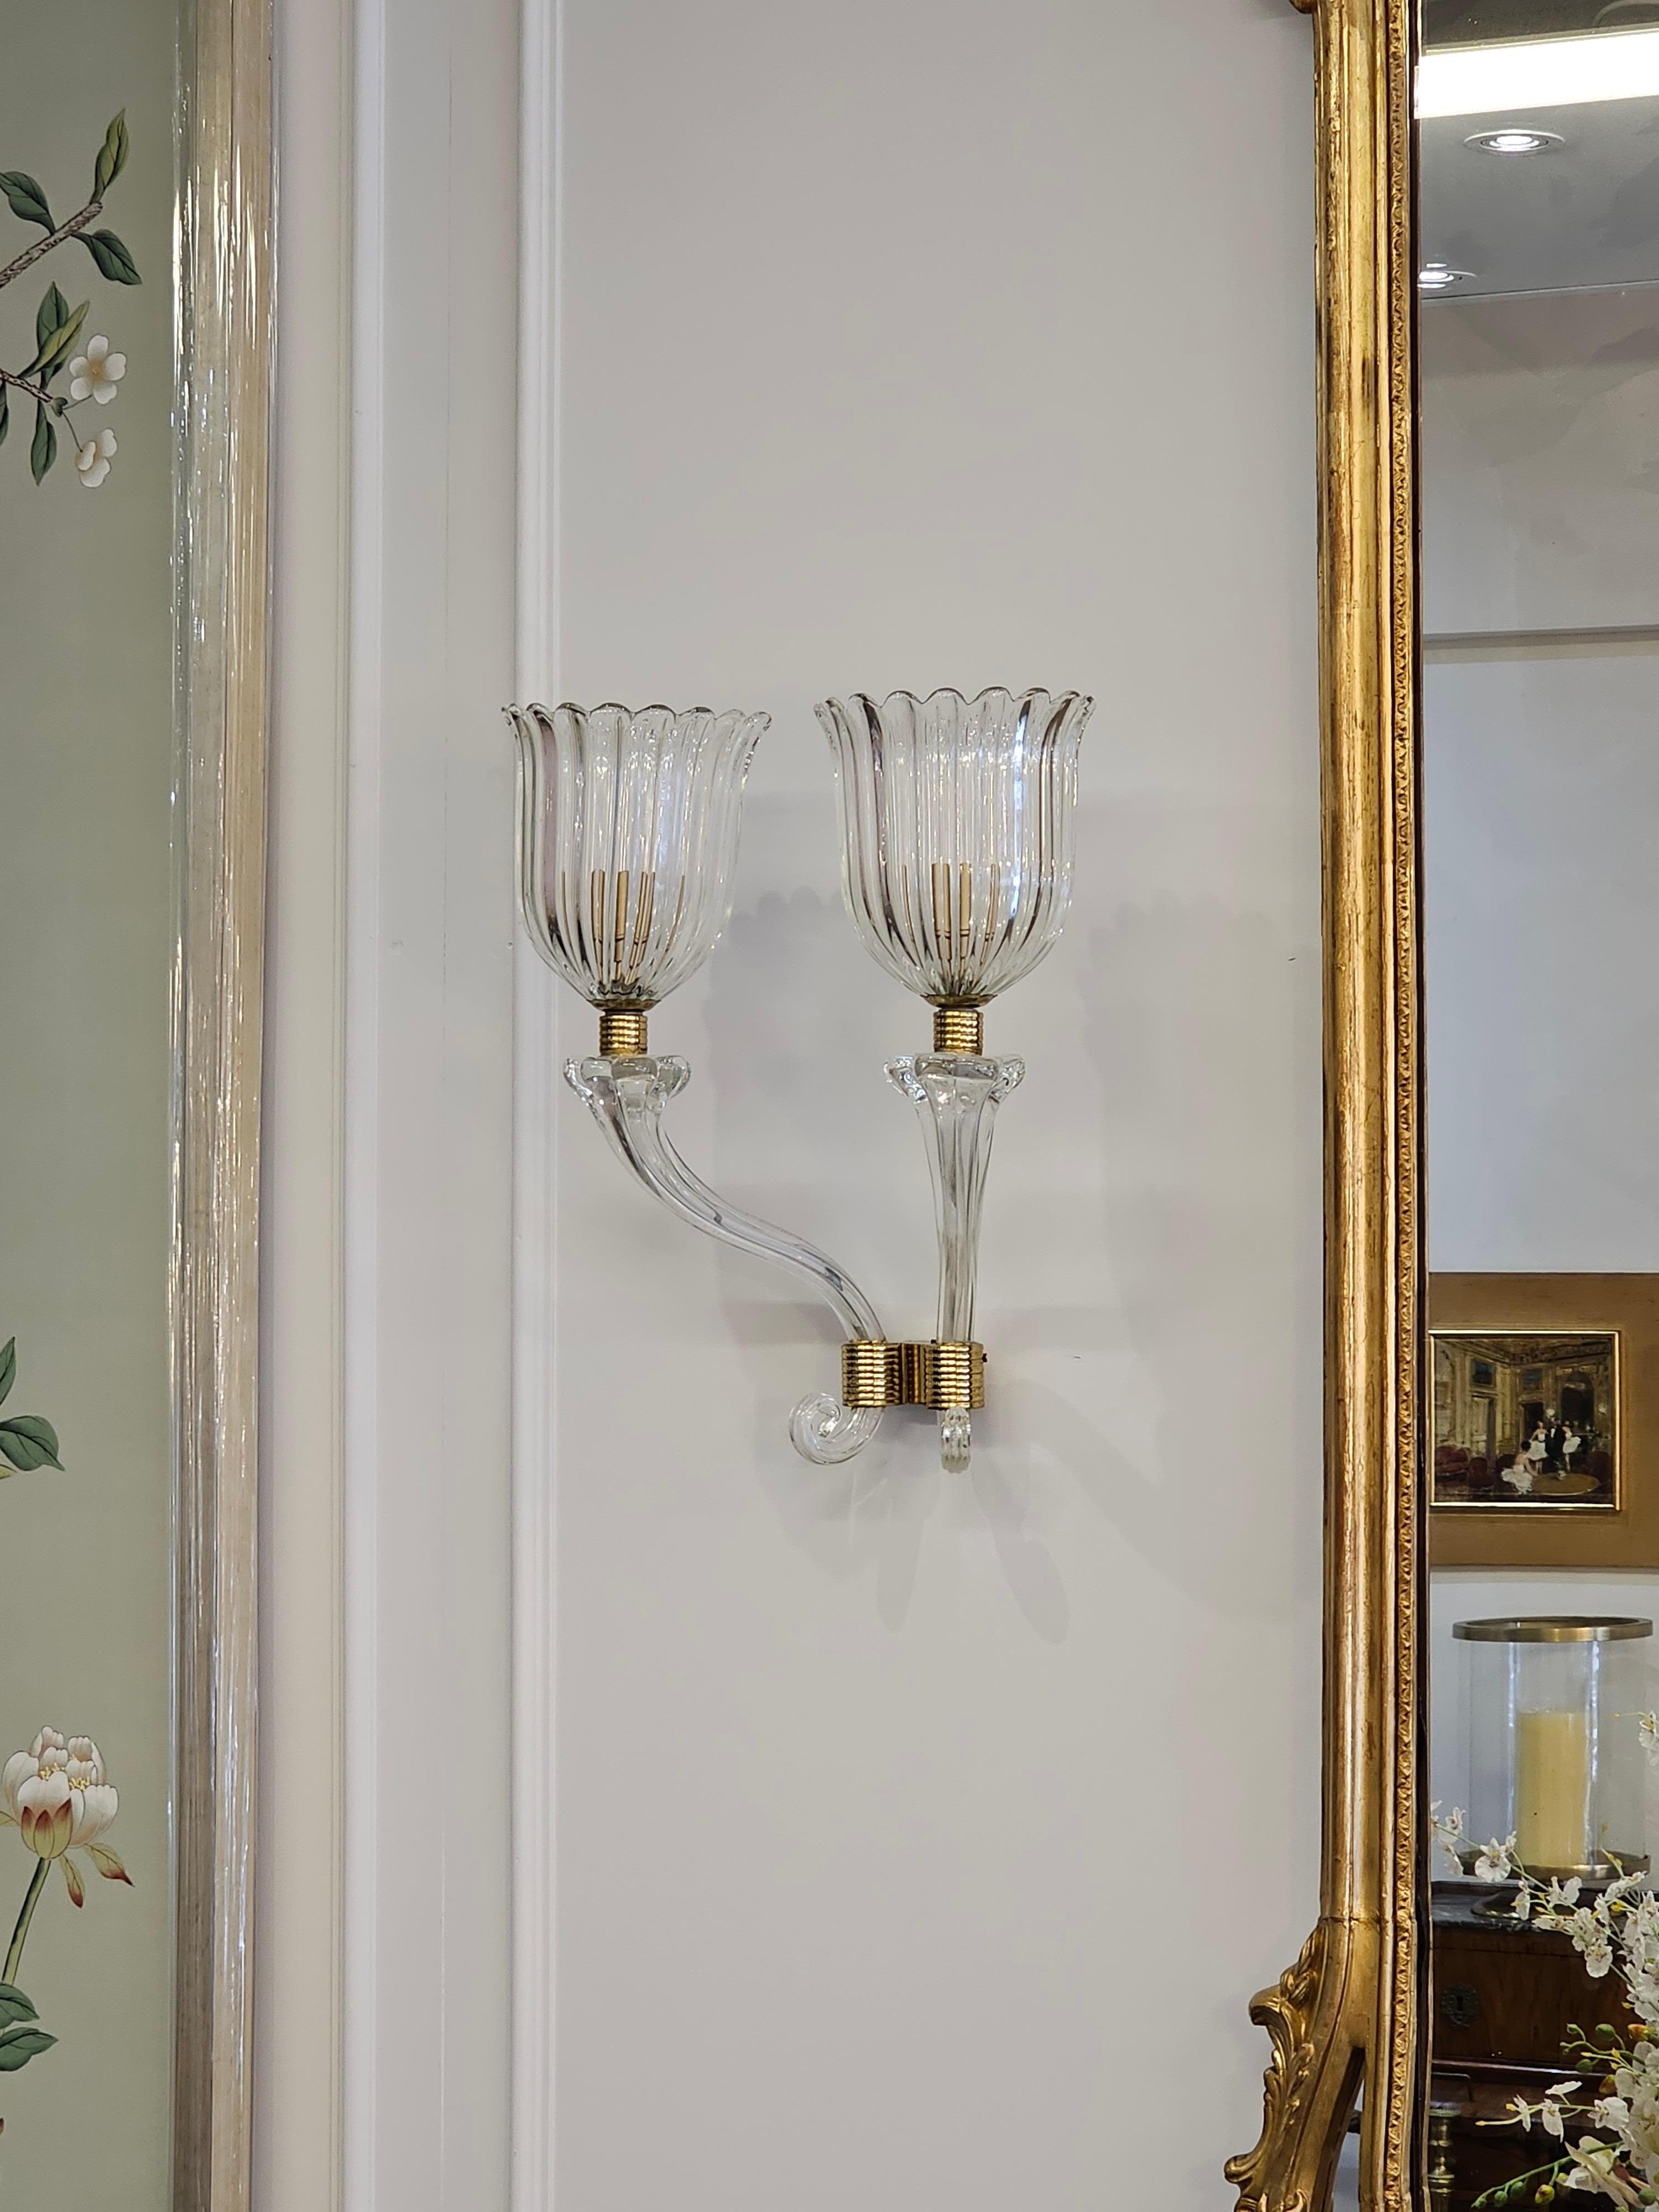 Mid-20th Century Pair of 1940s Murano Glass Tulip Cup Wall Sconces by Barovier & Toso For Sale